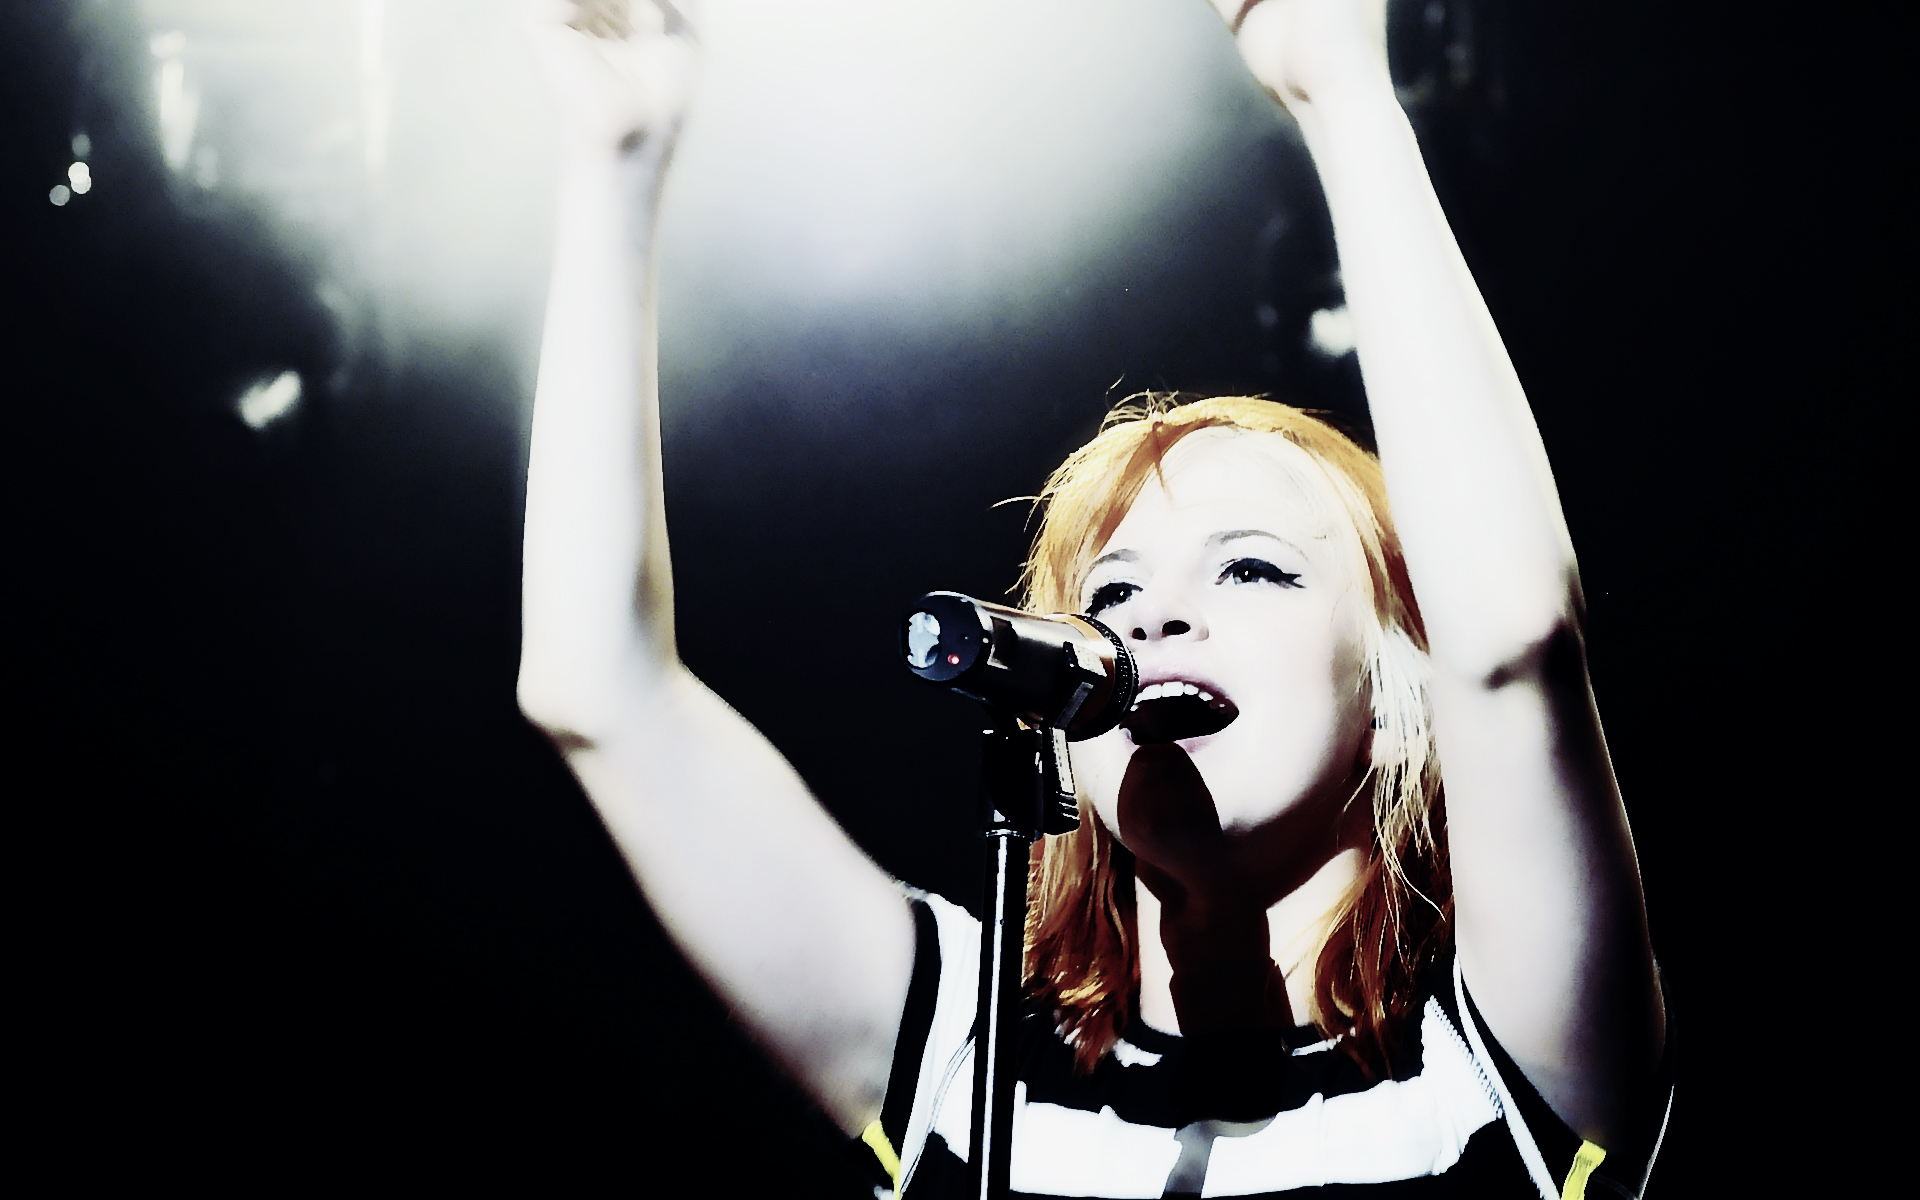 Williams Paramore Women Music Celebrity Singers Wallpaper Background